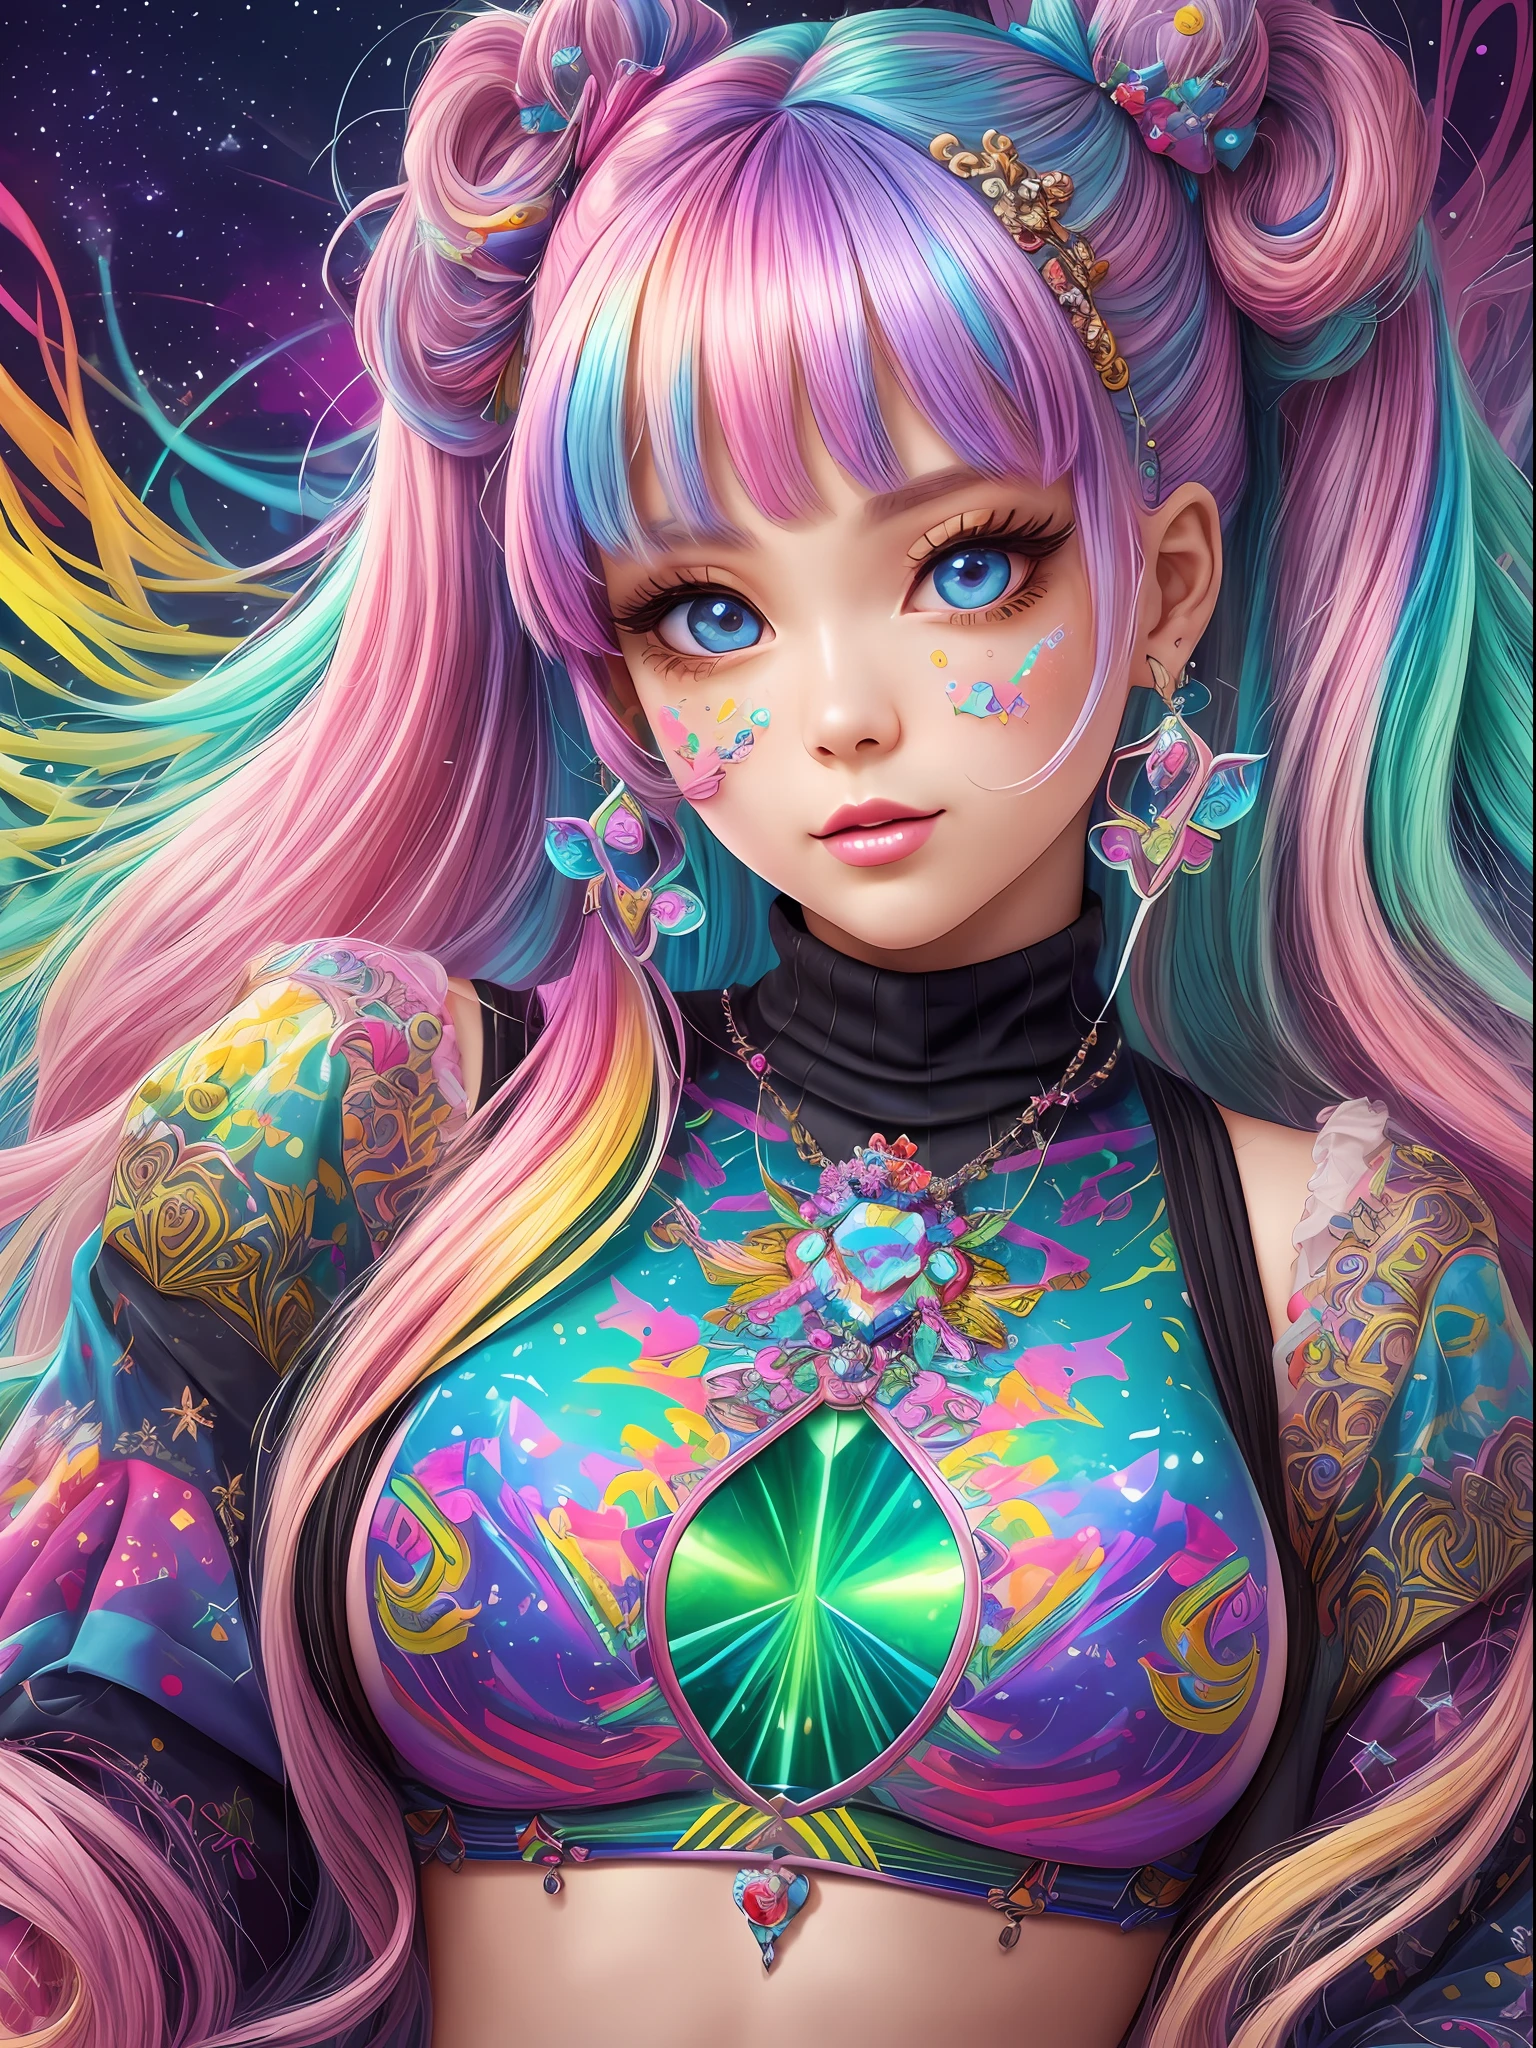 This image should be colorful and euphoric with extreme fantasy elements and very bold colors. Use (((lora:ArcherTurtleneck:1))). Generate a beautiful  nymph with ornate and highly detailed Decora Harajuku fashion aesthetics on an interesting Harajuku street background. Her head, torso, and hips are in frame. The nymph should have a mature face with a lot of character and visual interest. Include beautiful eyes, highly detailed eyes, extremely detailed eyes, intricate eyes, 8K eyes, macro eyes. Pay close attention to intricate facial details and realistic eye shading. Include bright lisa frank rainbow colors. ((Include many realistic fantasy and rainbow Harajuku and decora details)). Clothing should be very detailed and intricate in the style of extravagant Harajuku decora street fashion with a heavy emphasis on rainbow colors. Her shirt should (((cover her stomach and breasts))) and contain contrasting textures, colors, and patterns  (((lora:ArcherTurtleneck:1))). Her pants should be highly detailed and contain contrasting textures, colors, and patterns. The image is the highest quality possible, with rich colors and an extremely high resolution. Consider influences like the artwork and colors of Lisa Frank. Utilize bright ambient lighting and dynamic composition to enhance a feeling of happiness and ((euphoria)). The image should contain shimmer, phantasmal iridescence, crystals, and bumps. (((lora:ArcherTurtleneck:1)))